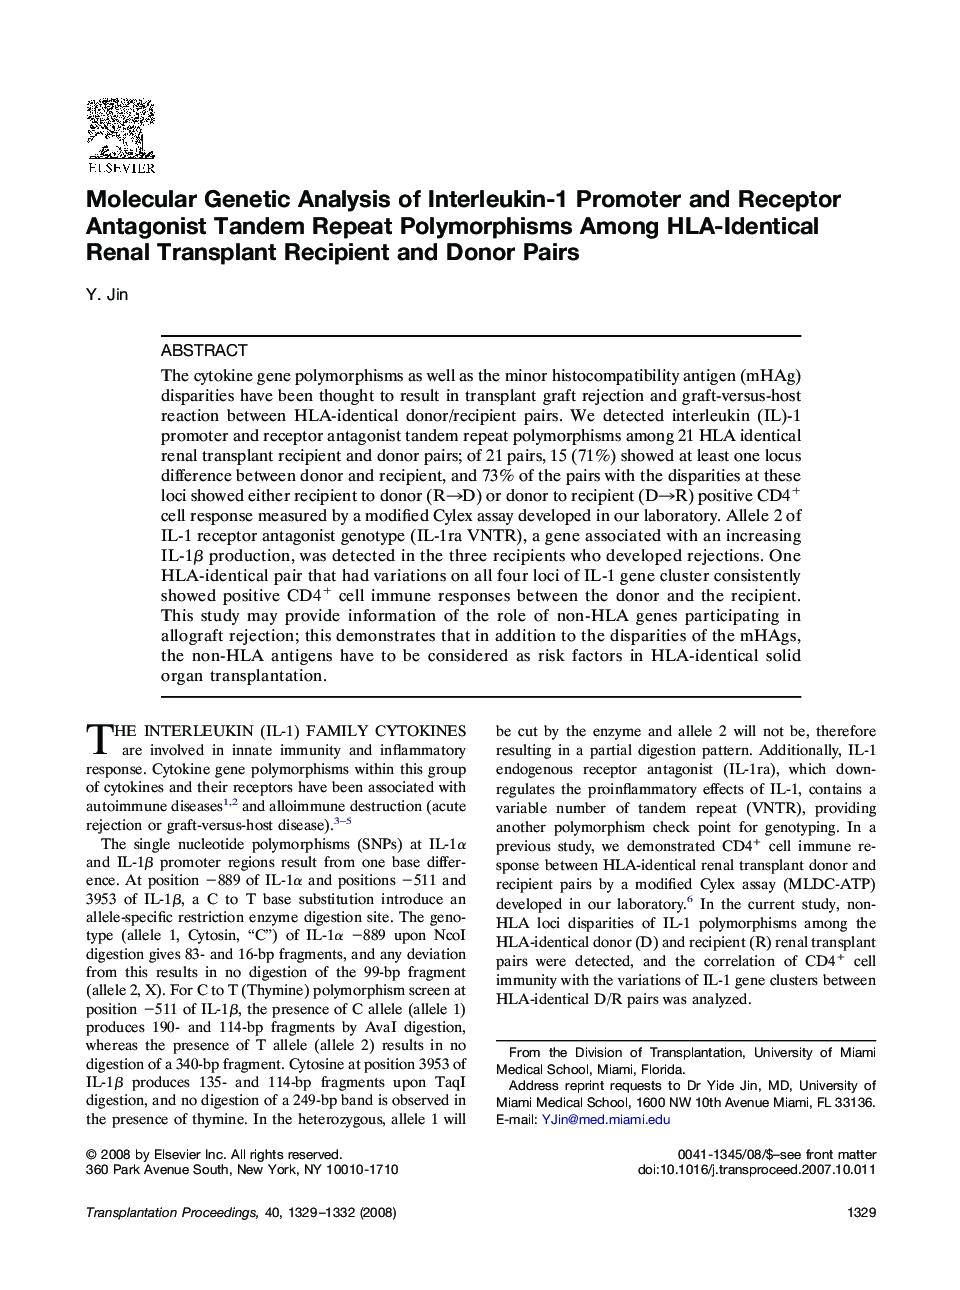 Molecular Genetic Analysis of Interleukin-1 Promoter and Receptor Antagonist Tandem Repeat Polymorphisms Among HLA-Identical Renal Transplant Recipient and Donor Pairs